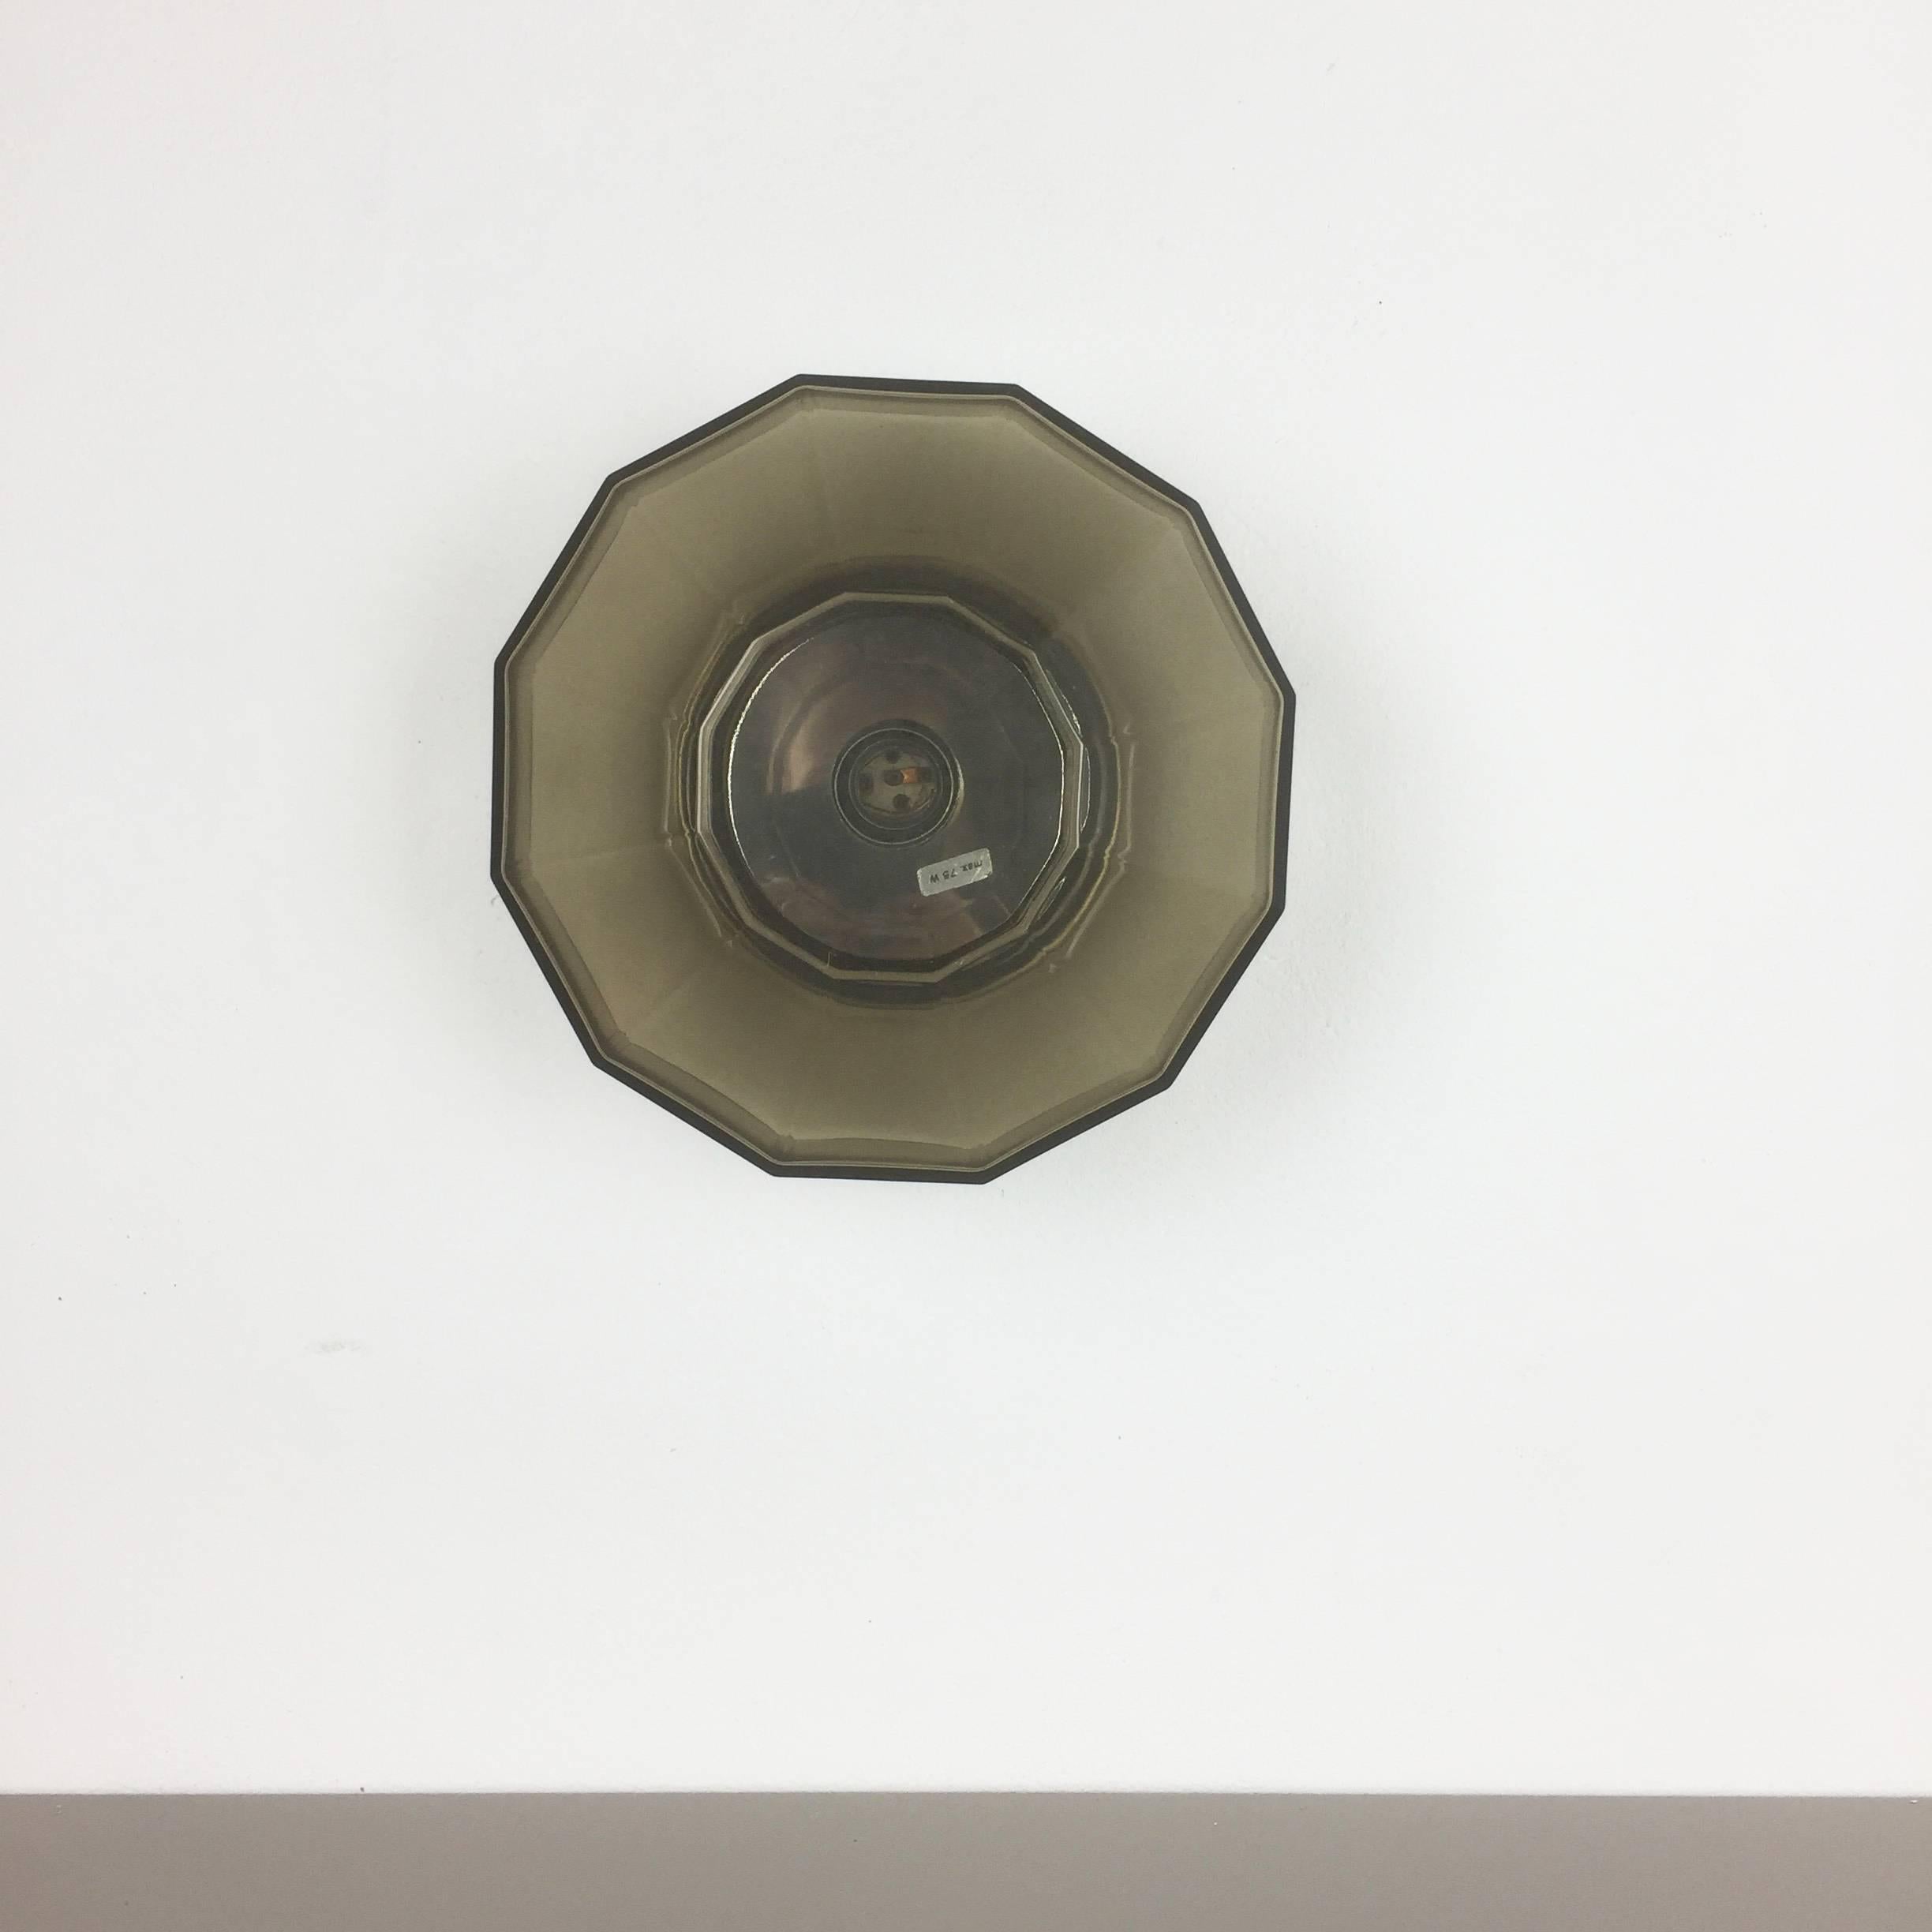 Article:

Wall light sconce


Producer:

Glashütte Limburg, Germany



Origin:

Germany



Age:

1970s




Description:

Original 1970s modernist German wall Light made of height quality green glass in cubic form with a